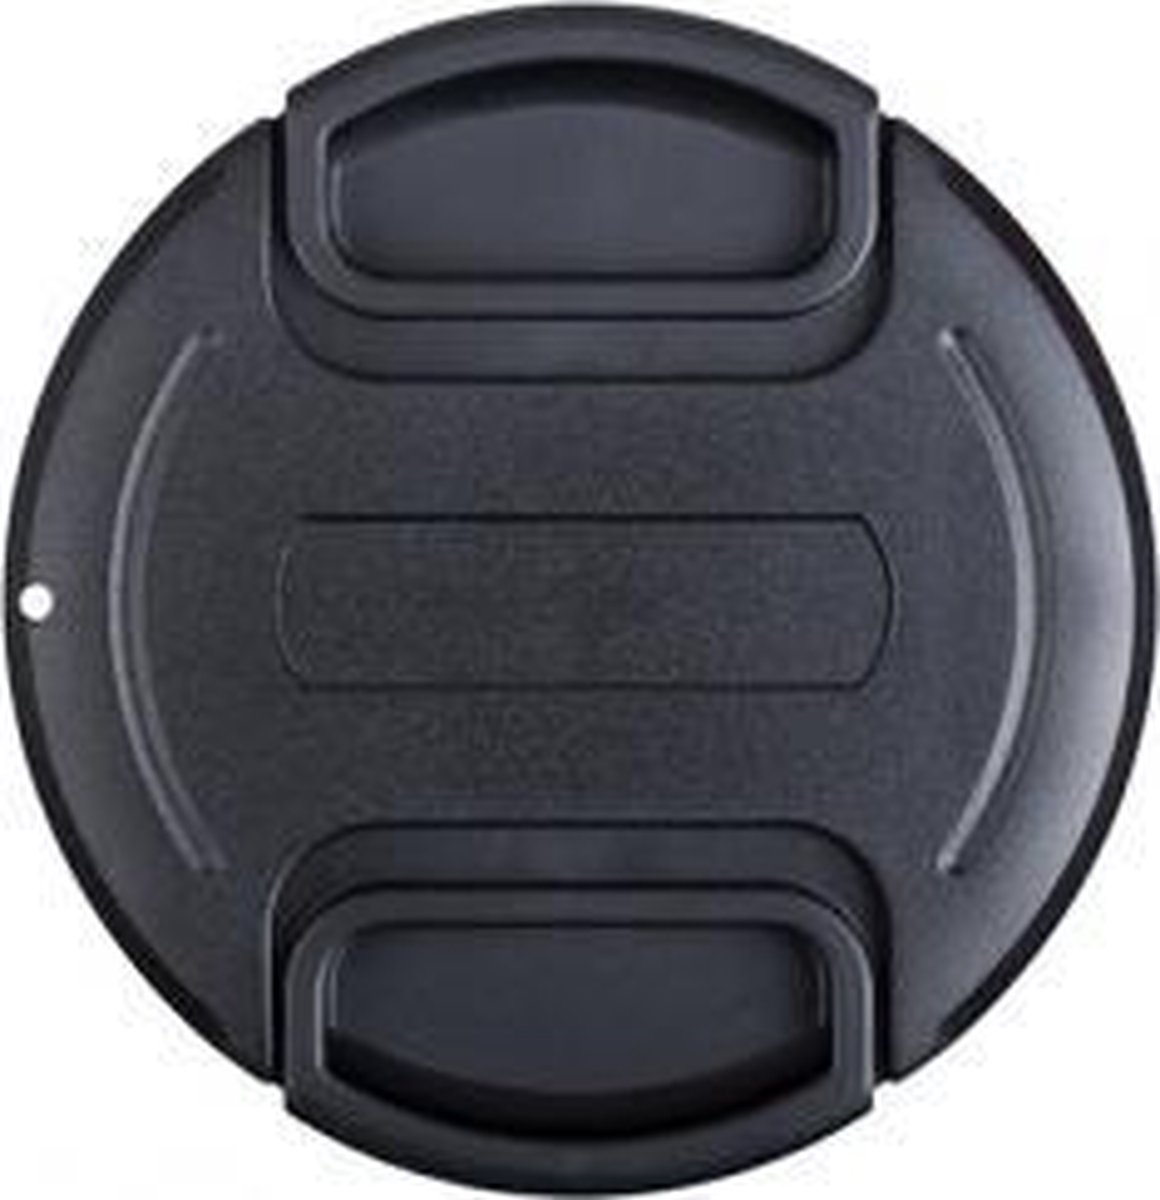 JJC 77mm Plastic Snap-on Lens Cap with lens cap keeper for Cameras and Camcorders - Canon, Leica, Nikon, Olympus, Panasonic, Pentax, Samsung, Sigma, Sony etc.